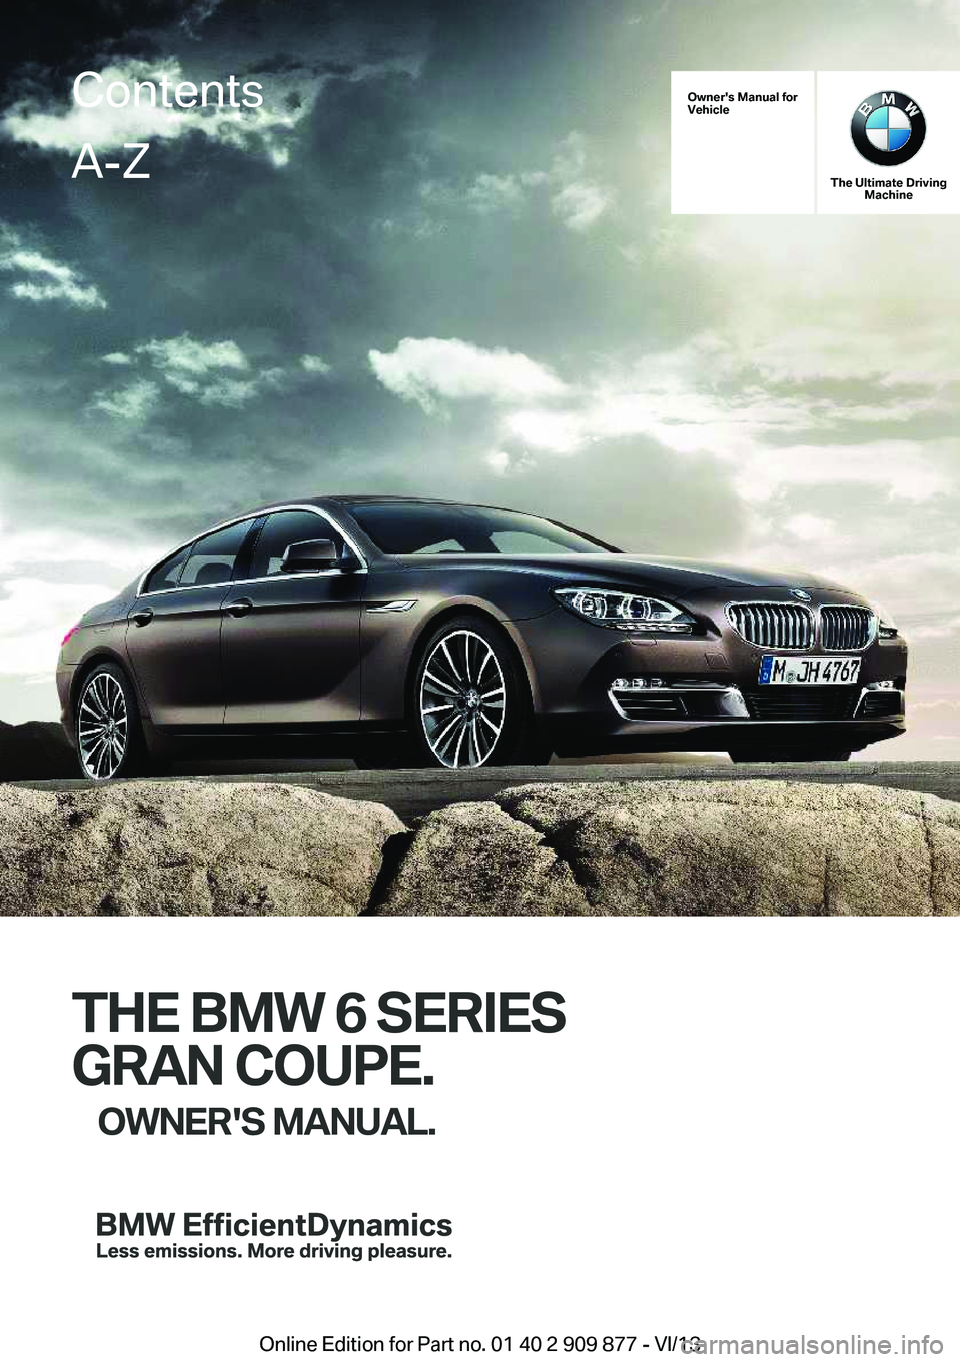 BMW 650I GRAN COUPE 2014  Owners Manual Owner's Manual for
Vehicle
The Ultimate Driving Machine
THE BMW 6 SERIES
GRAN COUPE. OWNER'S MANUAL.
ContentsA-Z
Online Edition for Part no. 01 40 2 909 877 - VI/13   